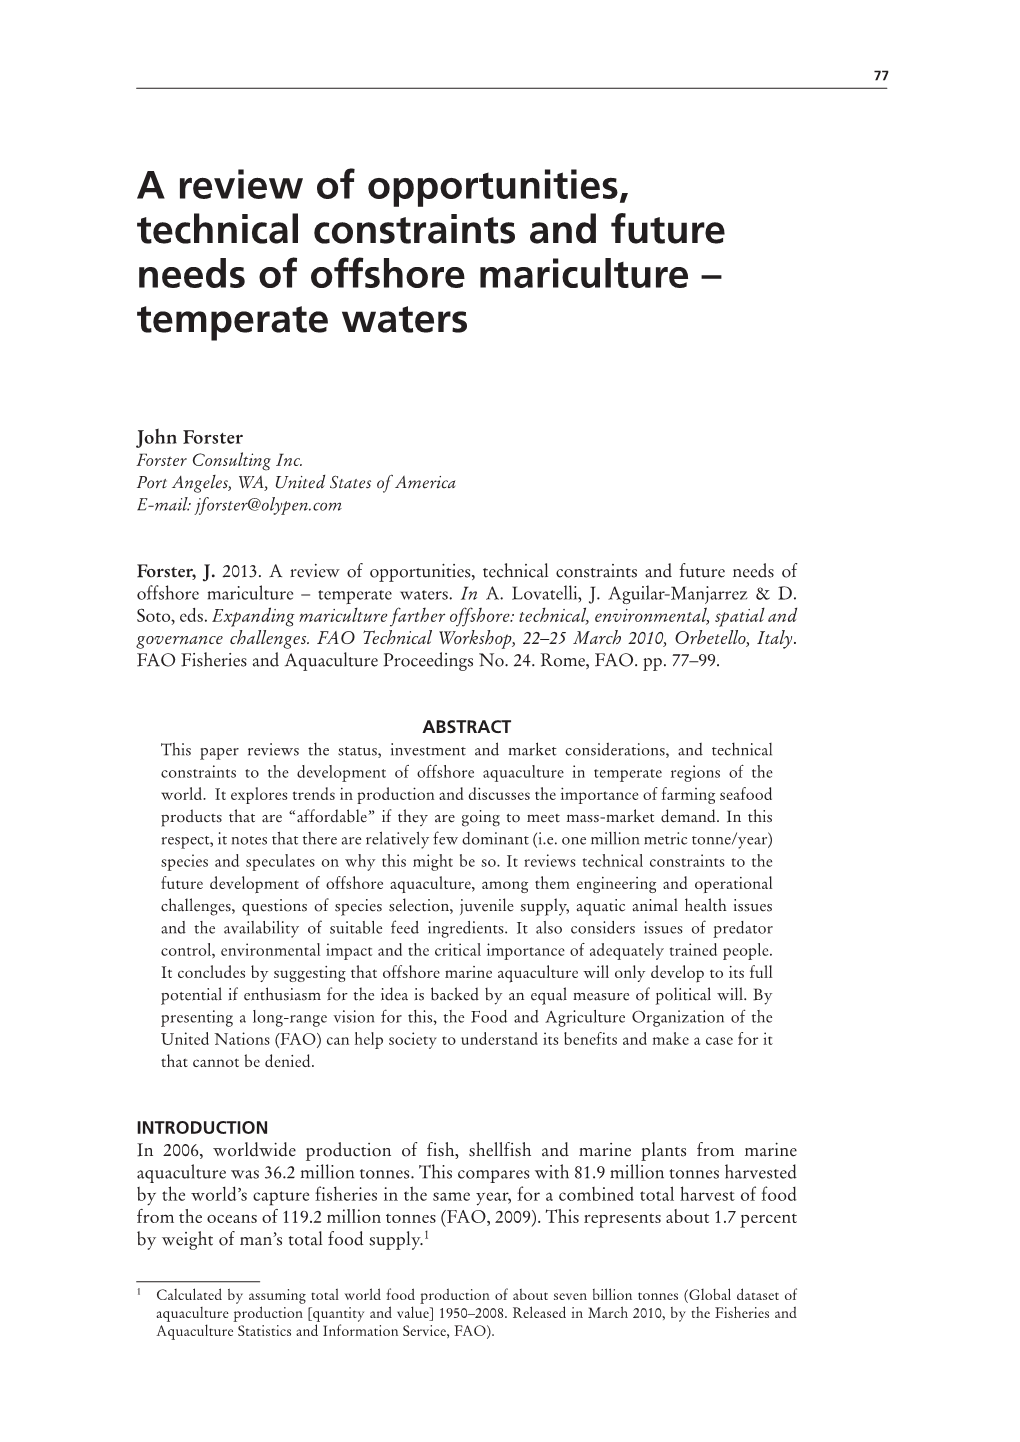 Expanding Mariculture Farther Offshore: Technical, Environmental, Spatial and Governance Challenges